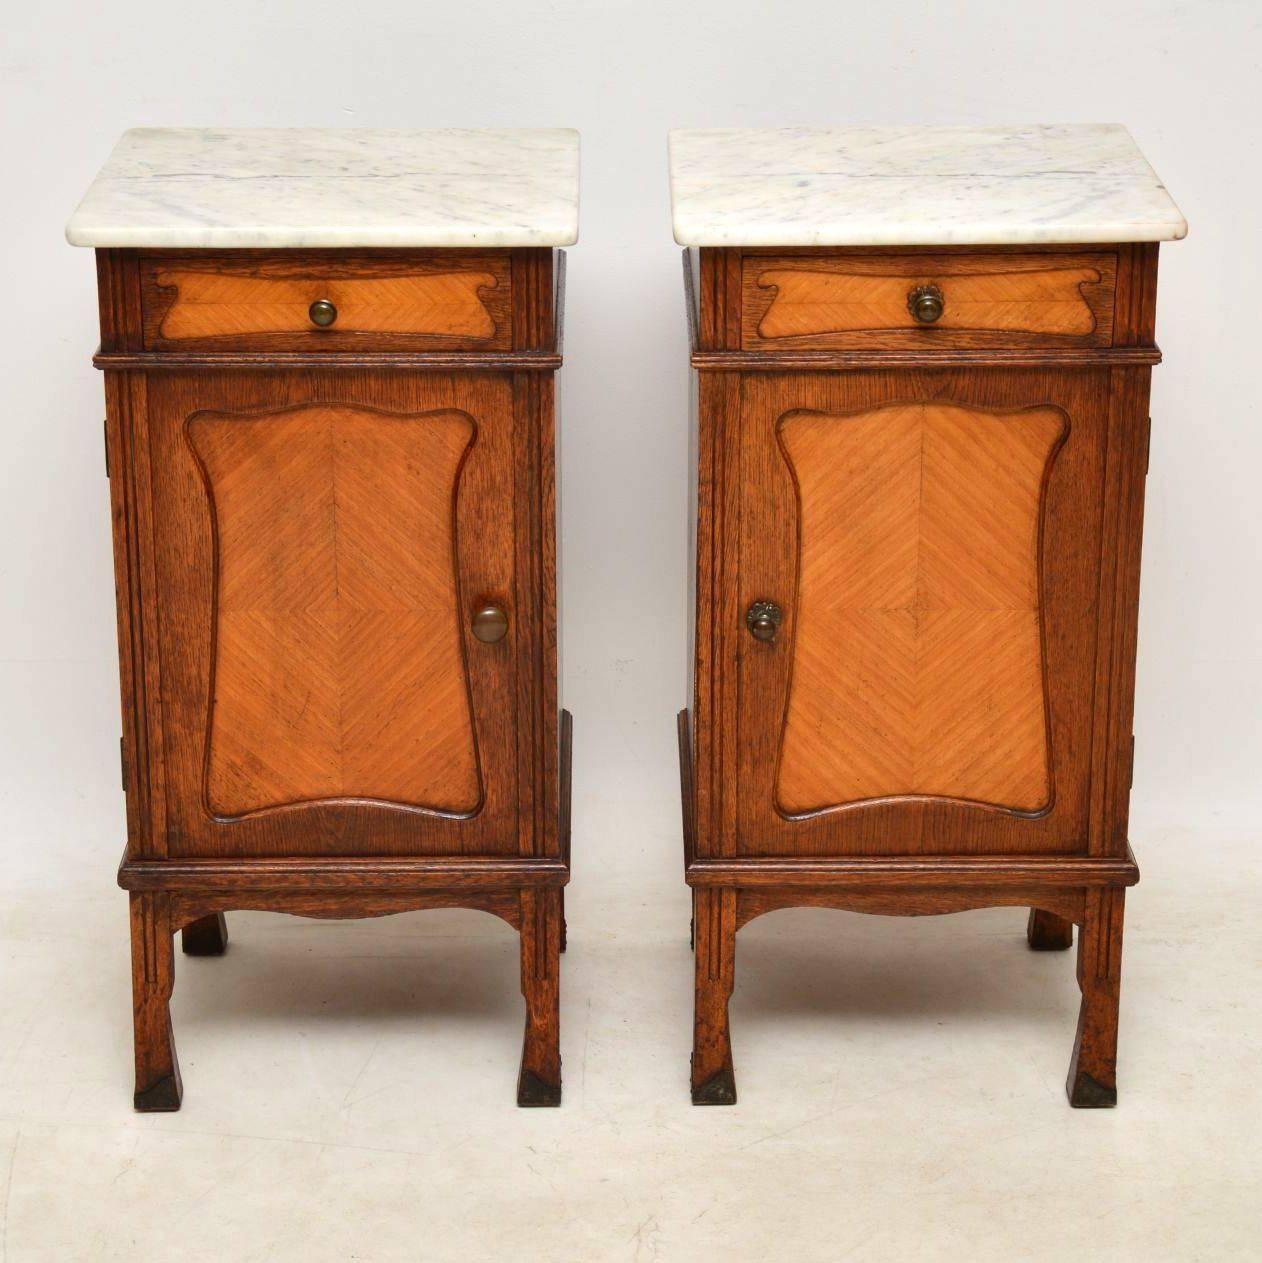 Late Victorian Pair of Antique French Marble-Top Bedside Cabinets